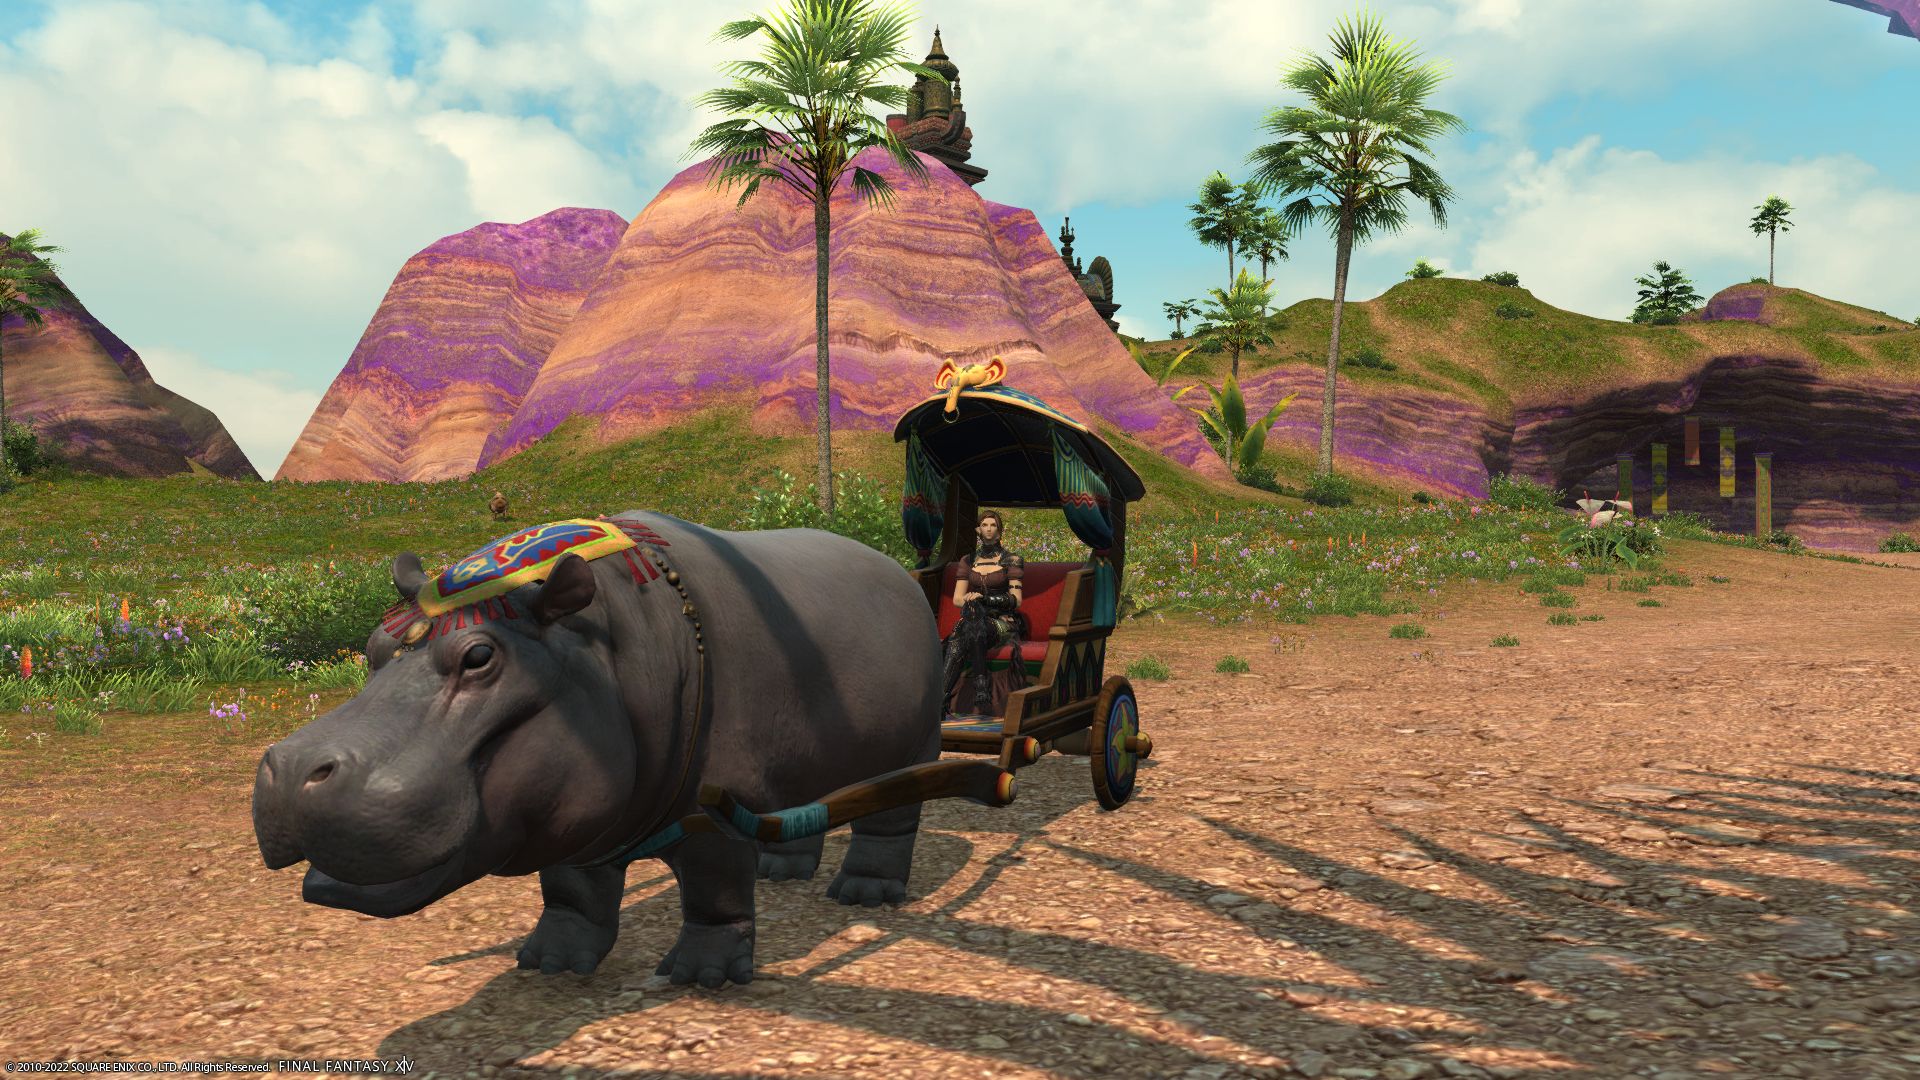 FF14 State of the Game - the player in a caraven being towed by a kind of hippo creature in a desert-like environment